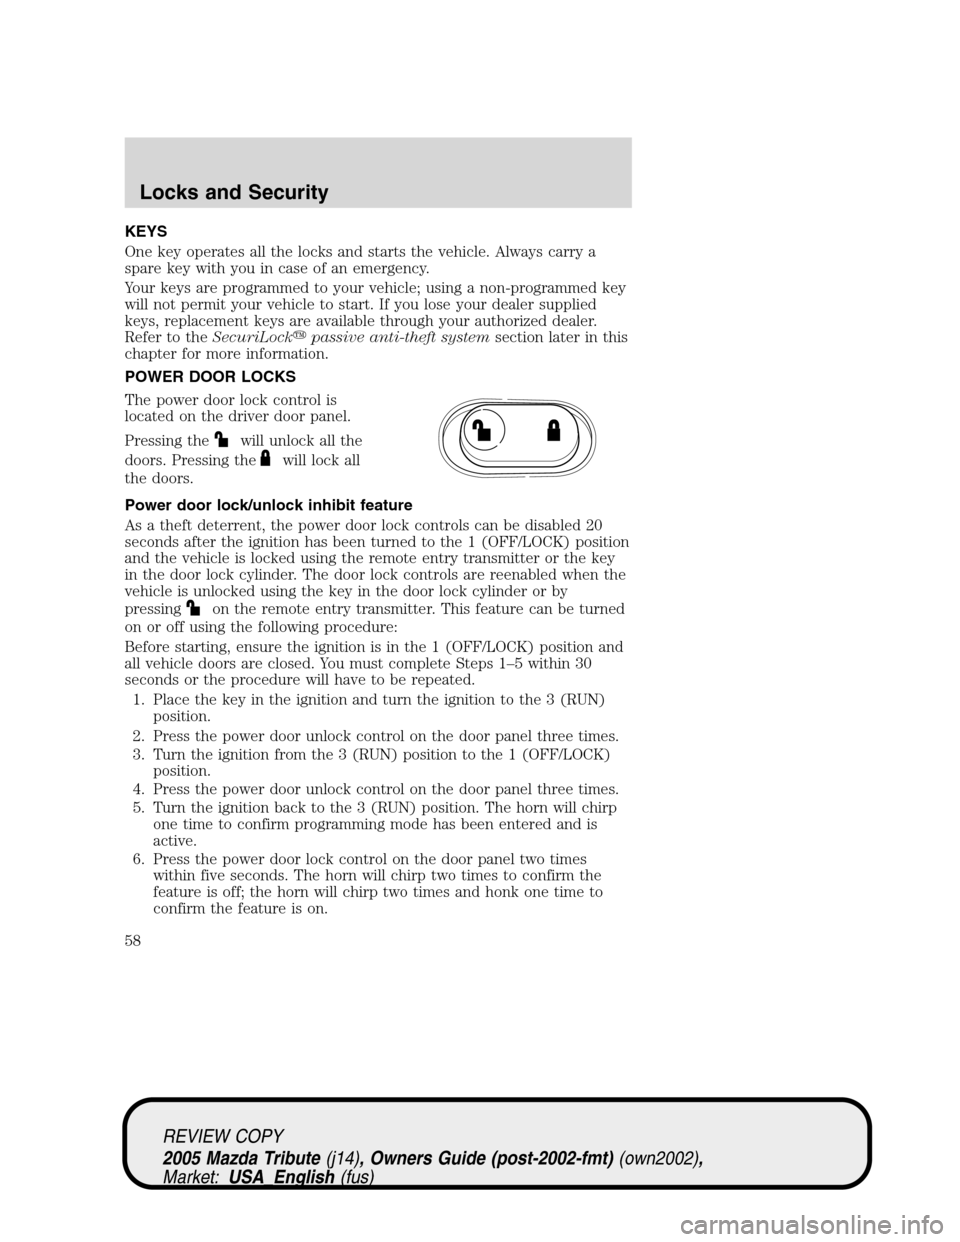 MAZDA MODEL TRIBUTE 2005  Owners Manual (in English) KEYS
One key operates all the locks and starts the vehicle. Always carry a
spare key with you in case of an emergency.
Your keys are programmed to your vehicle; using a non-programmed key
will not per